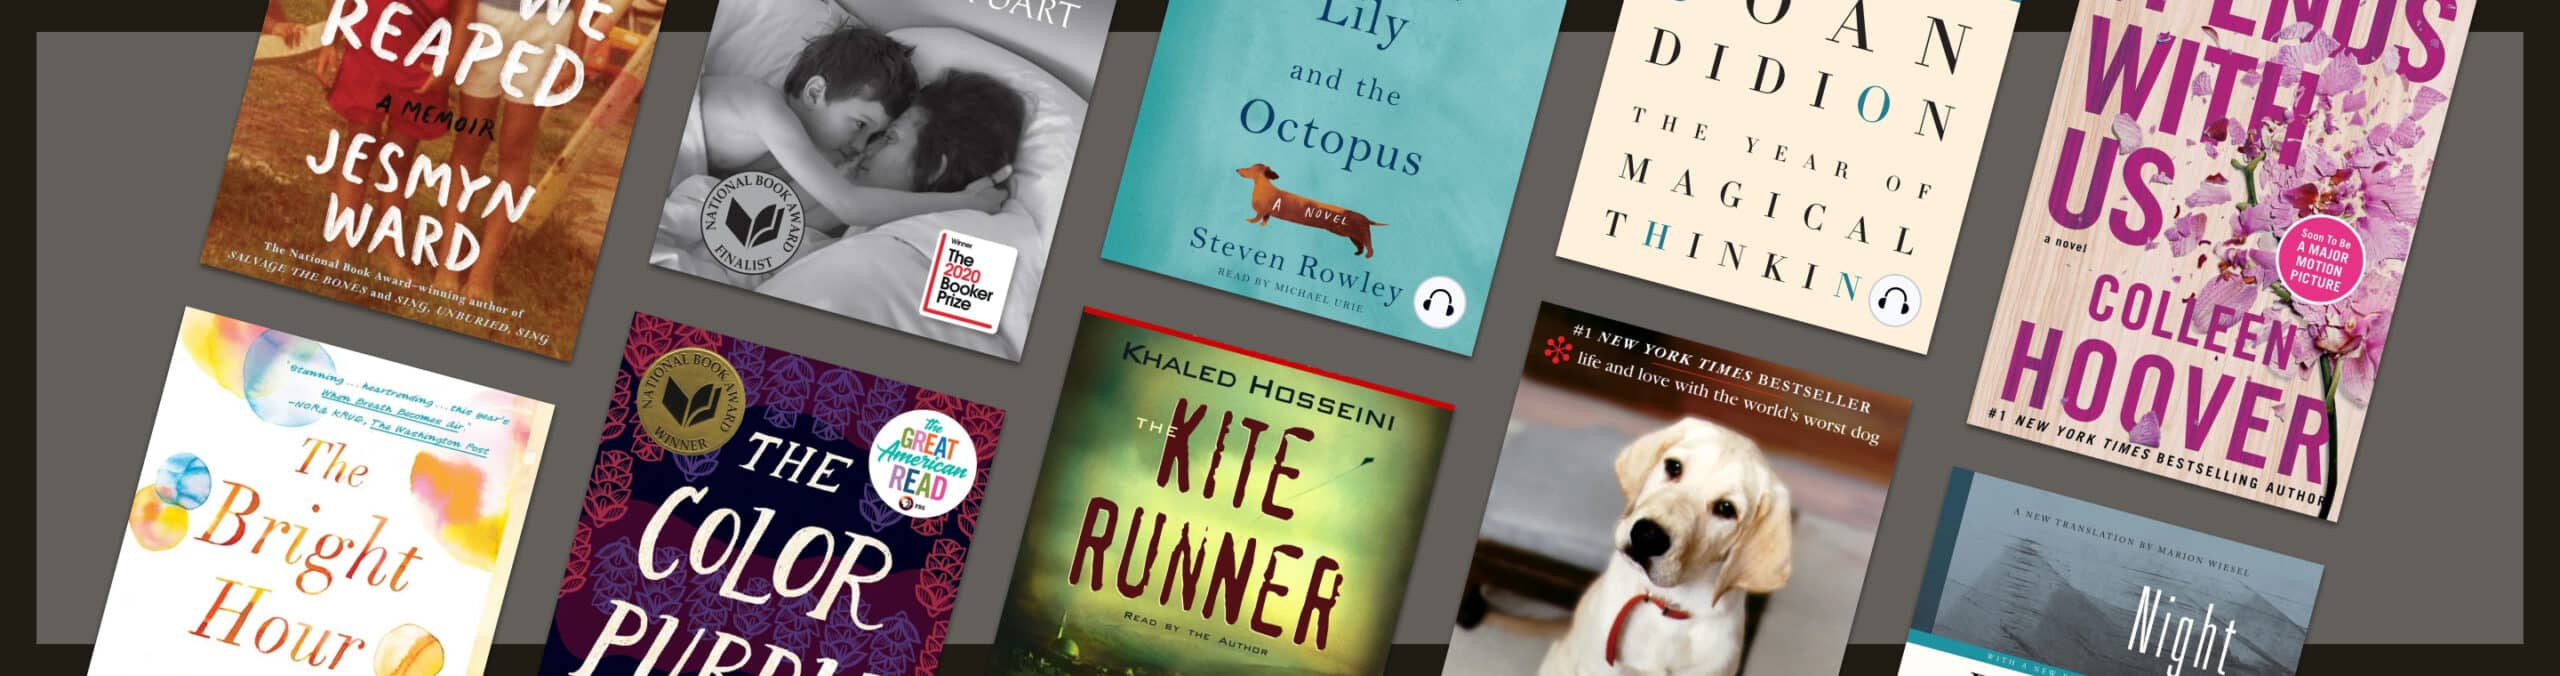 16 sad books that will make you cry (in a cathartic way)